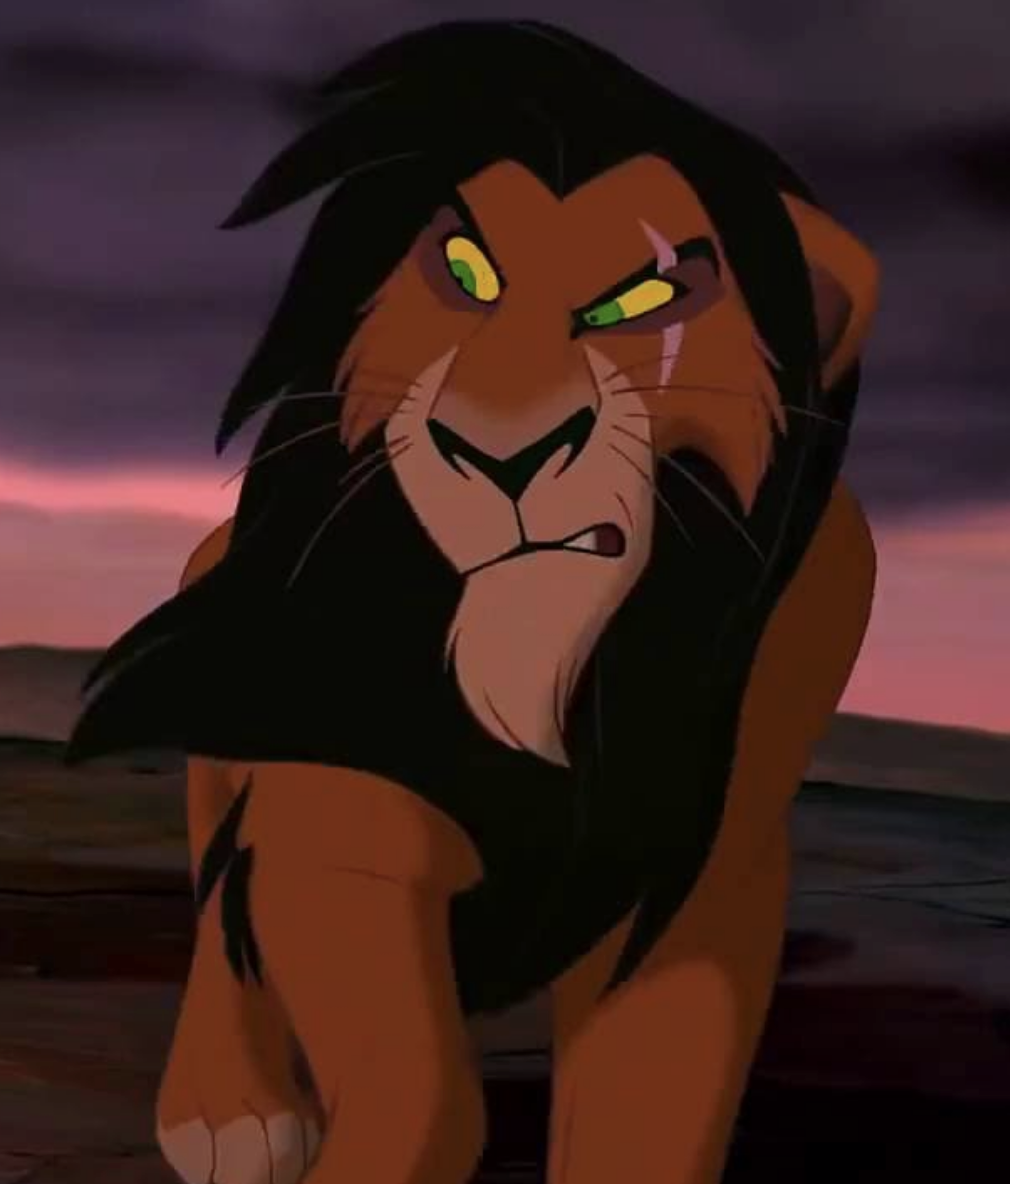 Scar standing on Pride Rock in the movie